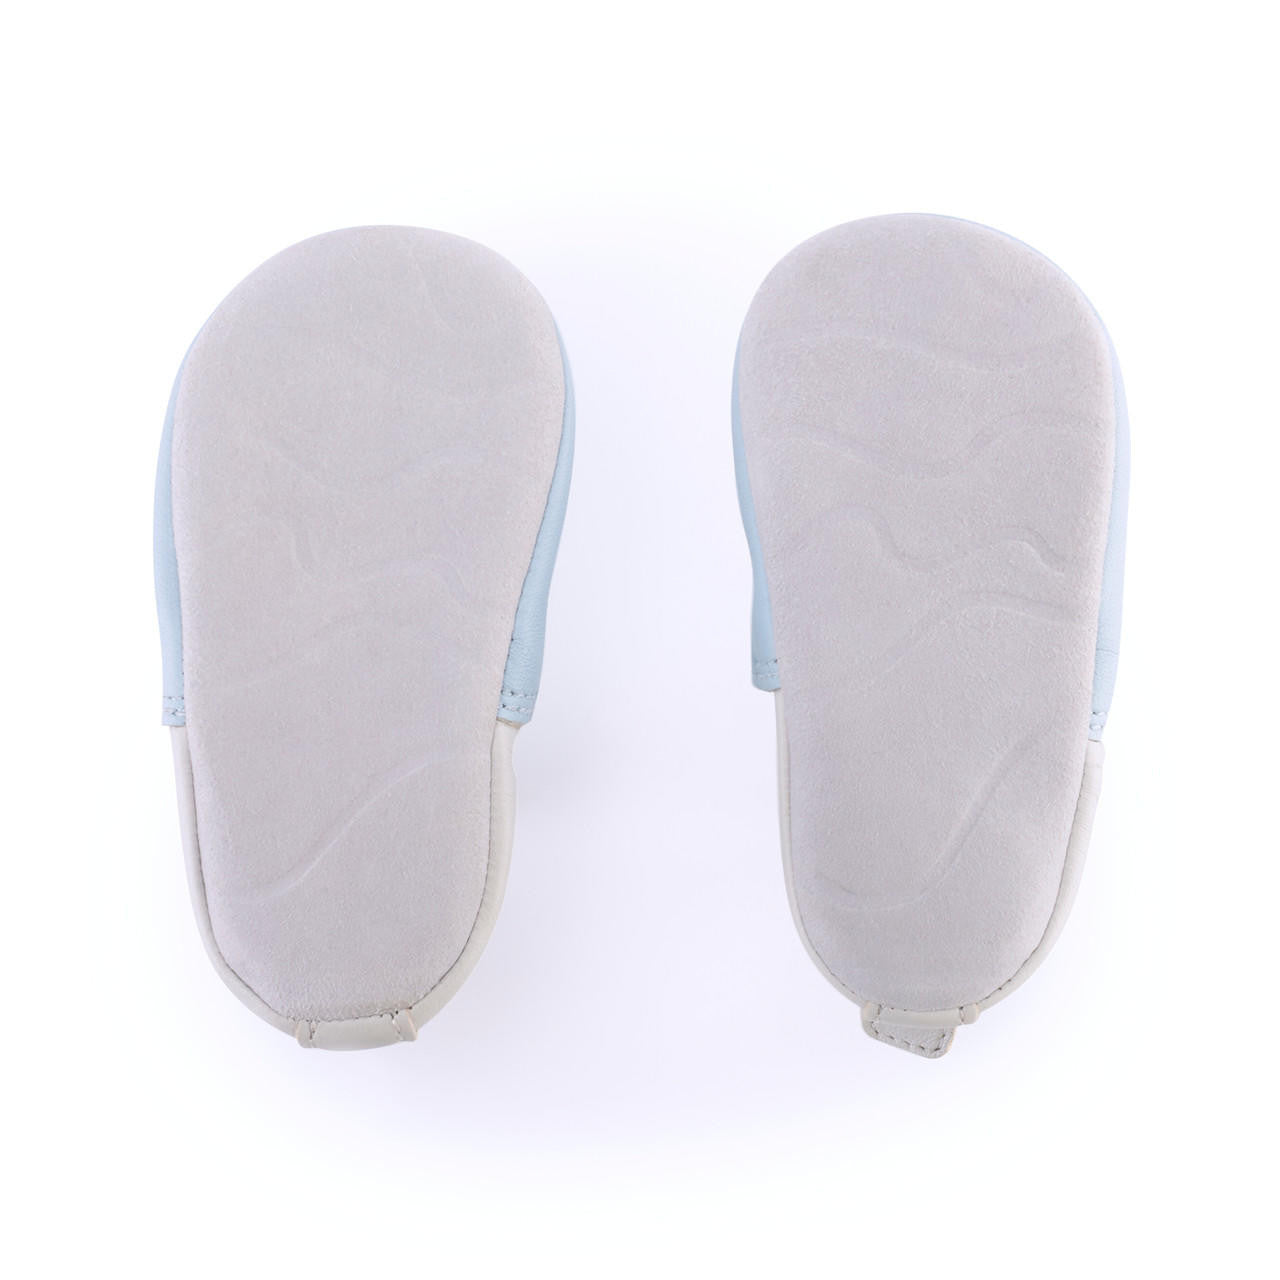 A unisex pram shoe by Start-Rite. Style is fable, a pull on in pale blue leather. Bottom view.